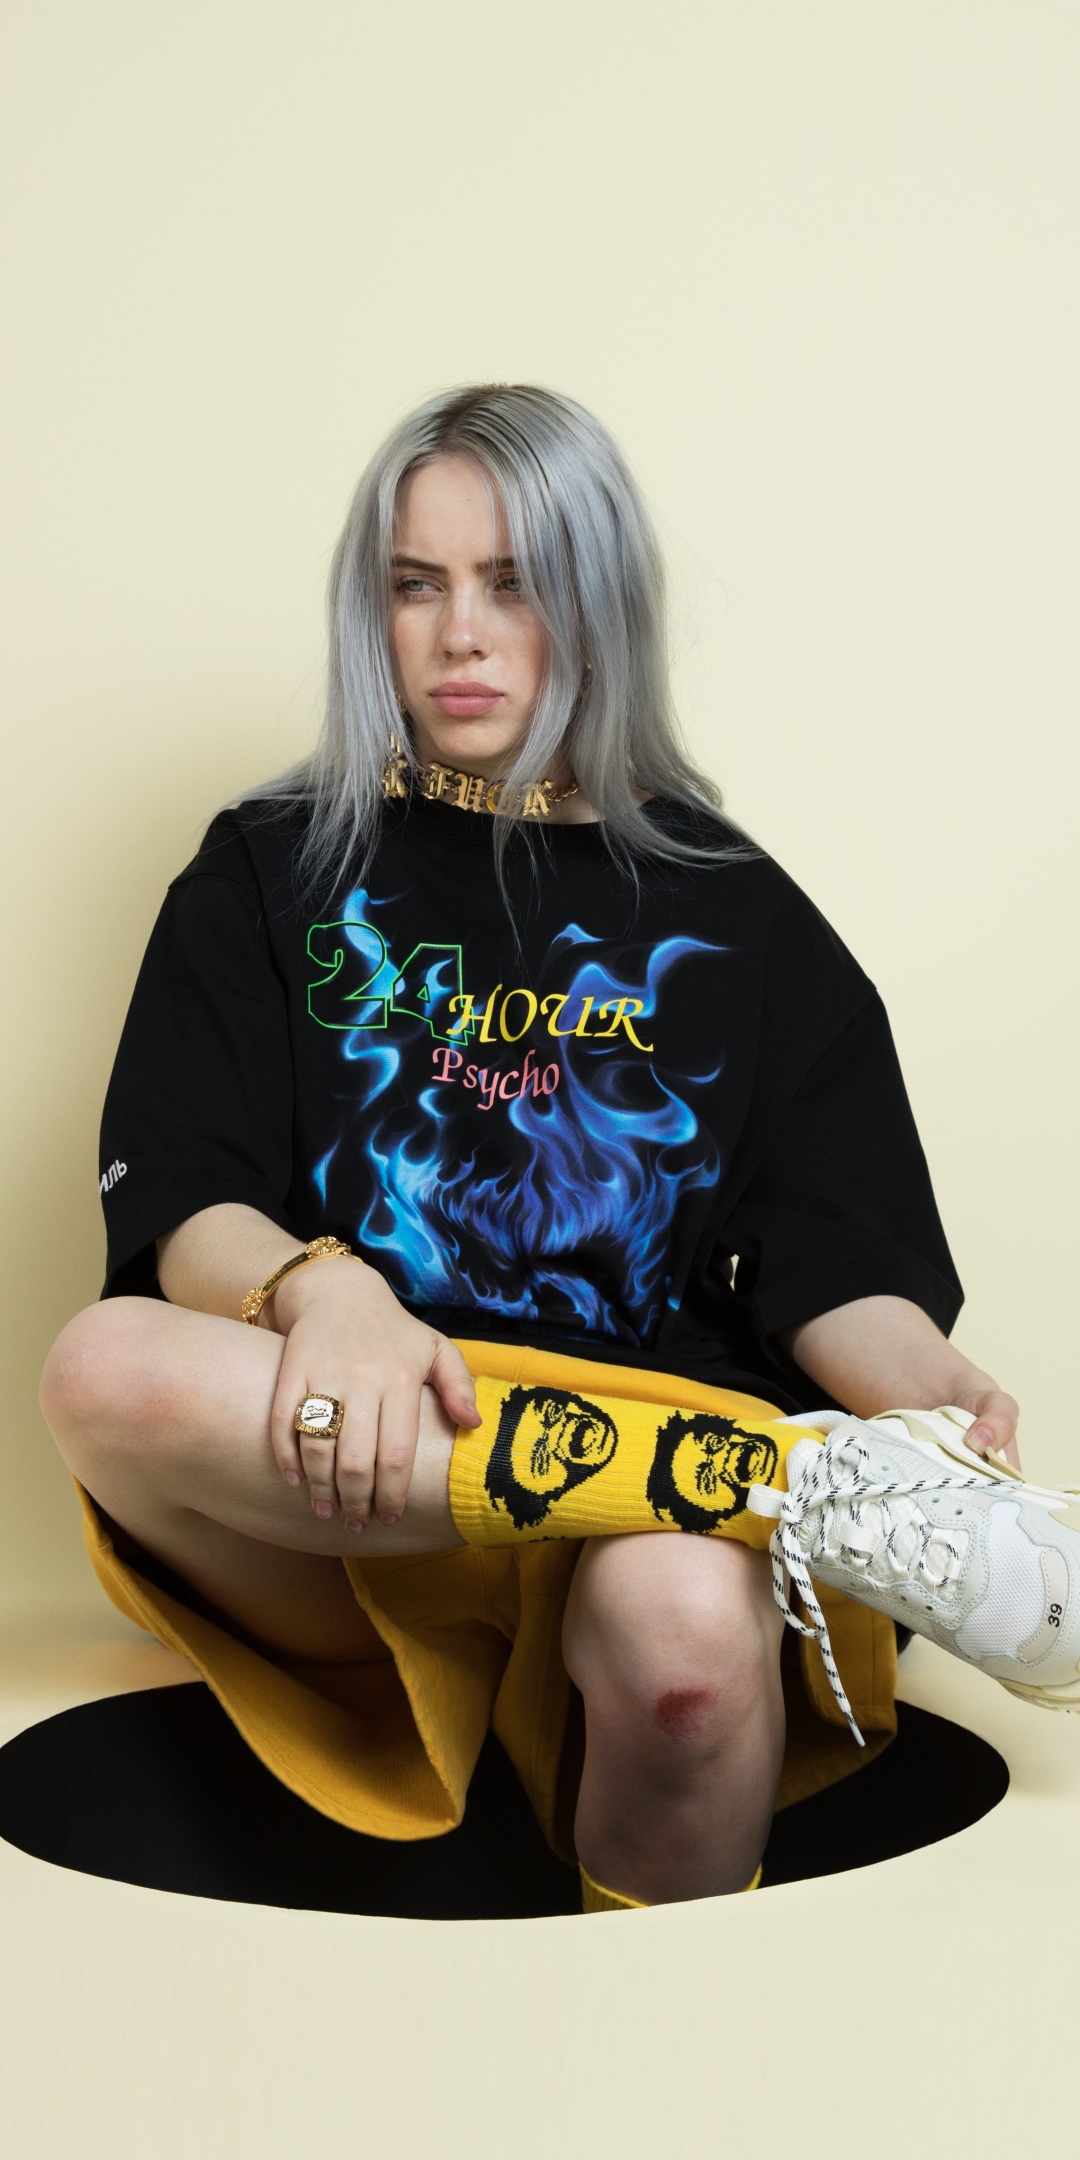 MusicBillie Eilish 1080x2160 Wallpaper ID 782112   Mobile Abyss